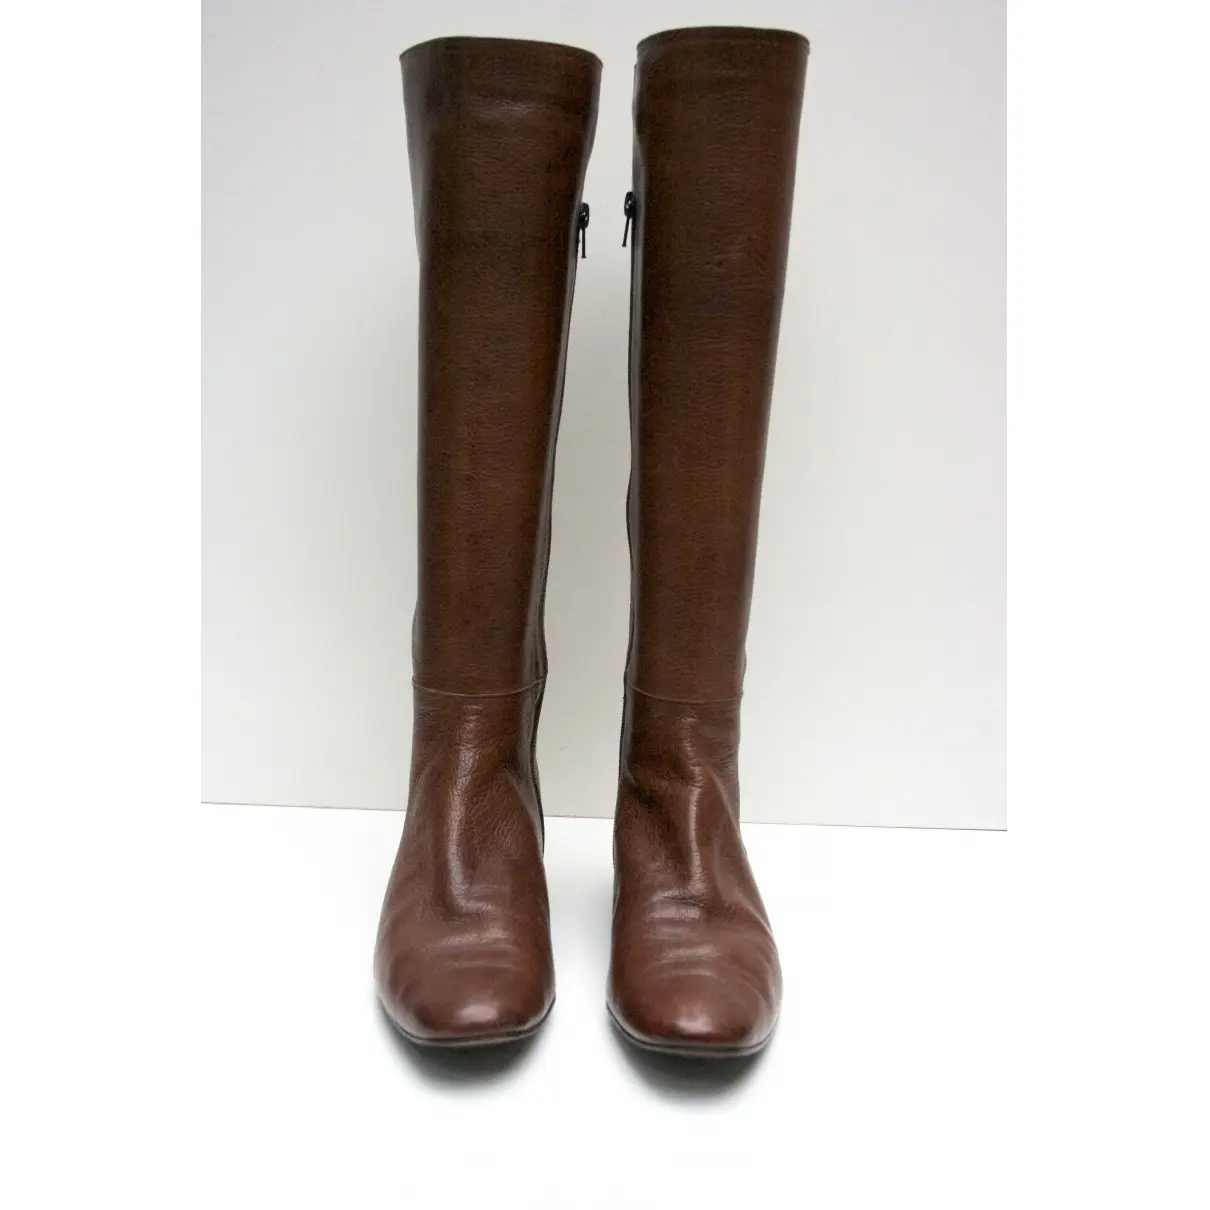 Buy Delman Leather riding boots online